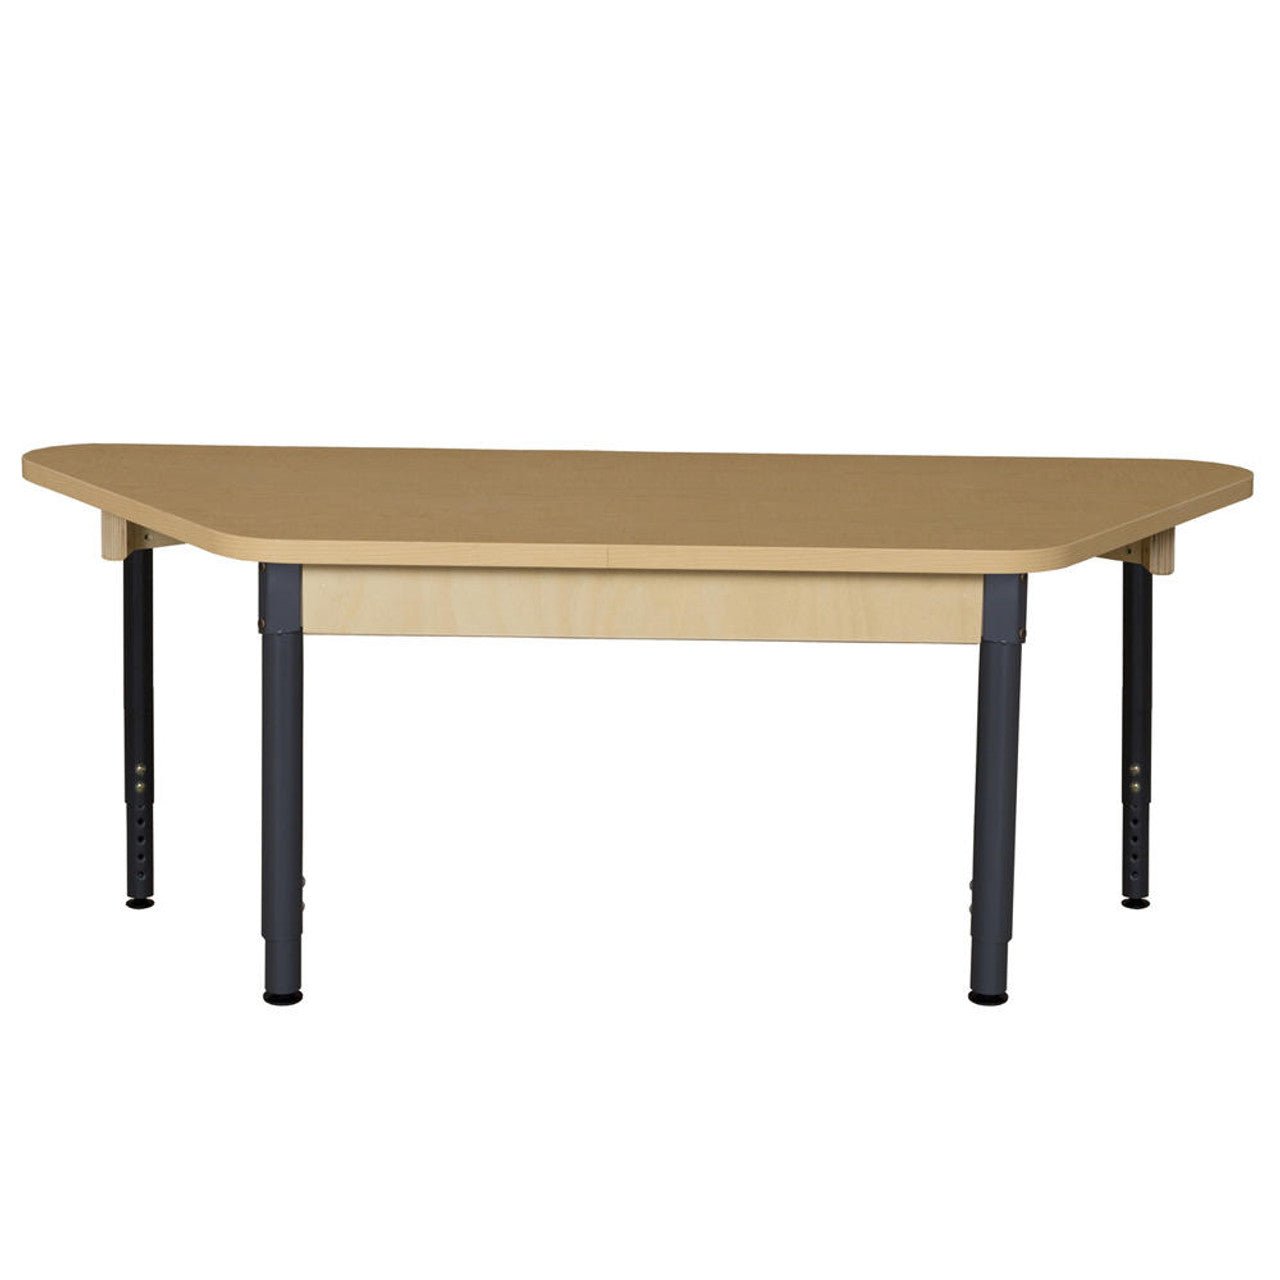 Trapezoidal High Pressure Laminate Table with Adjustable Legs 18"-29"